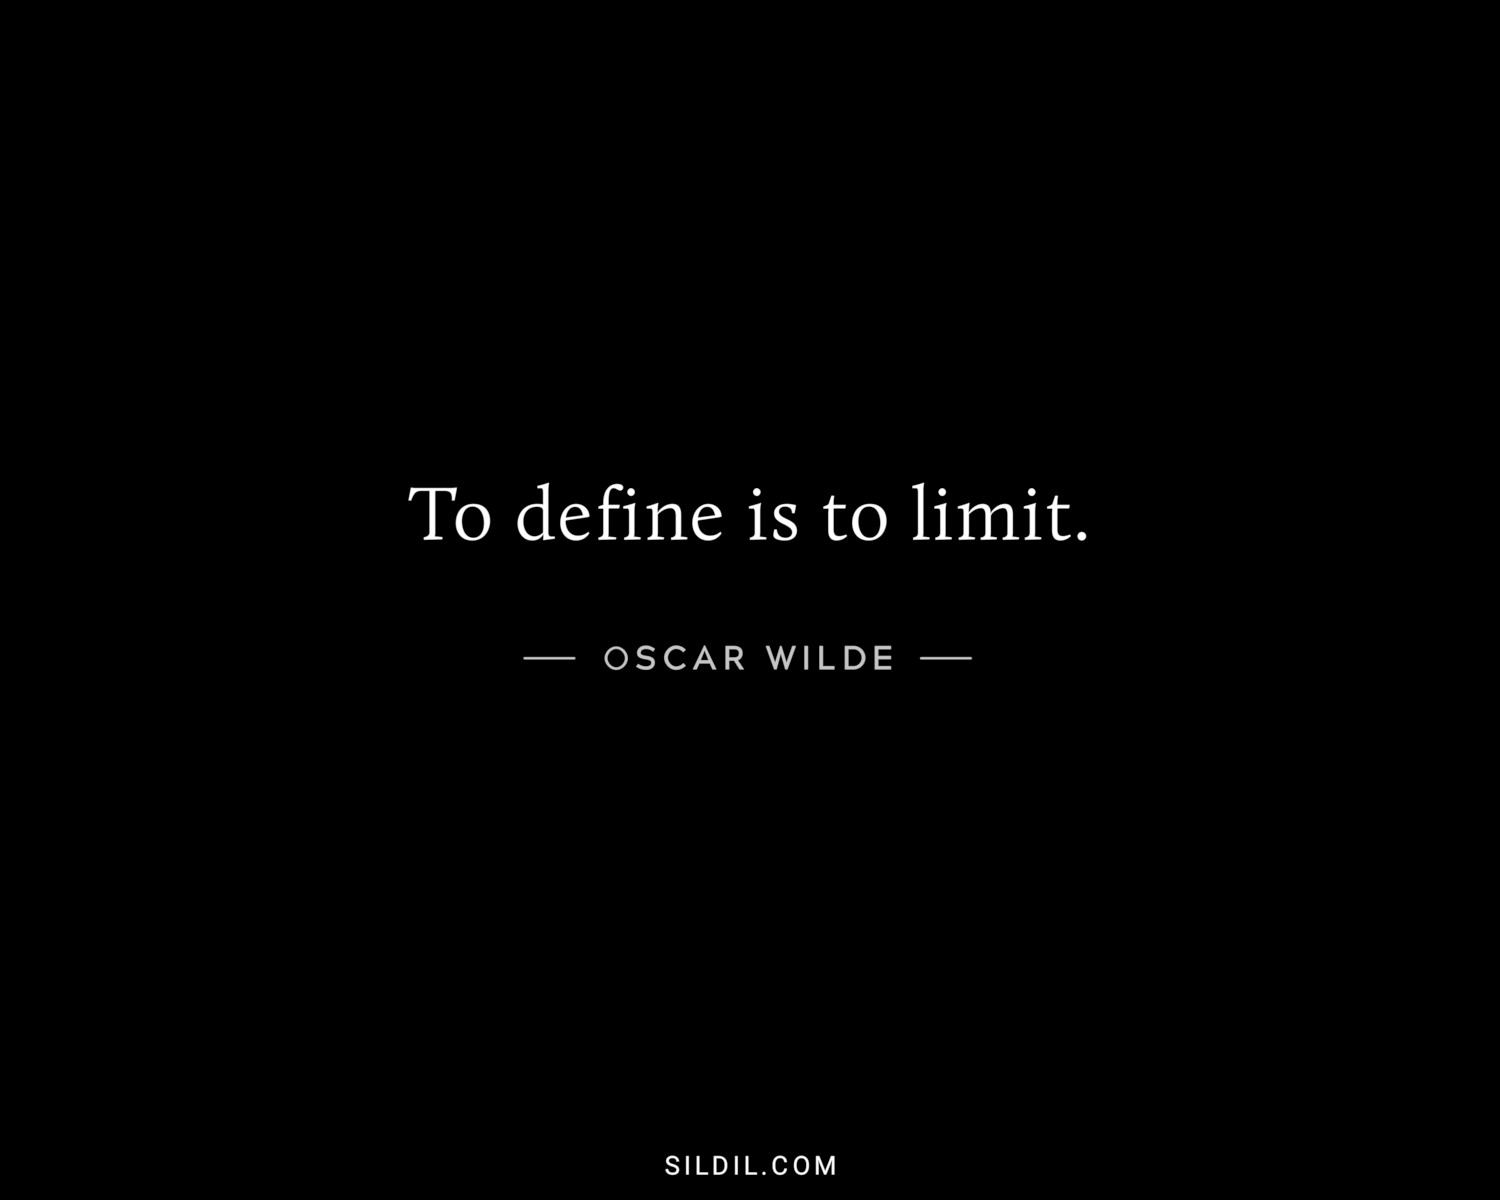 To define is to limit.